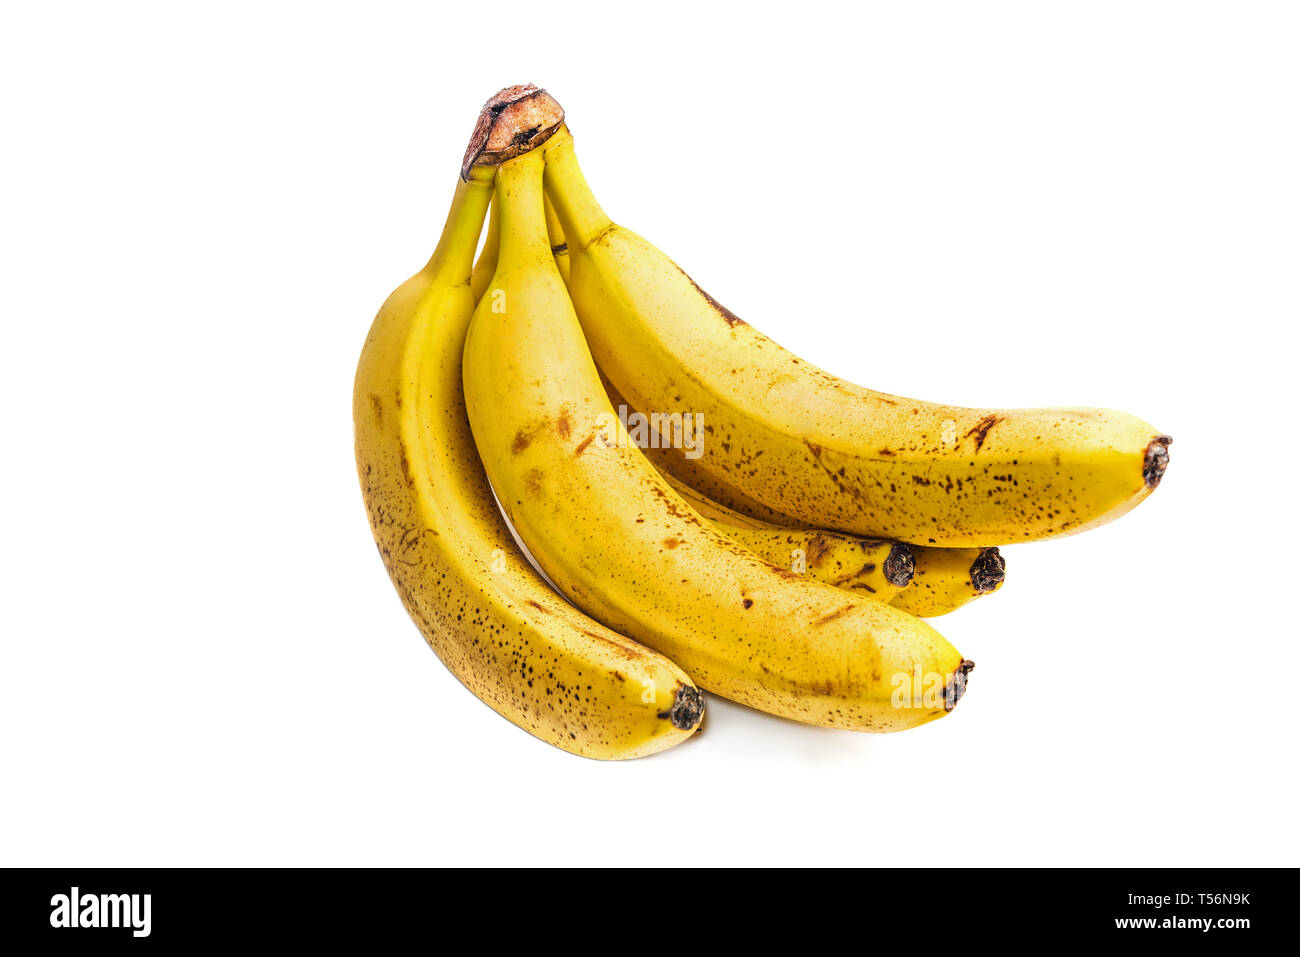 Bunch of Ripe Bananas with dark spots isolated on white Stock Photo